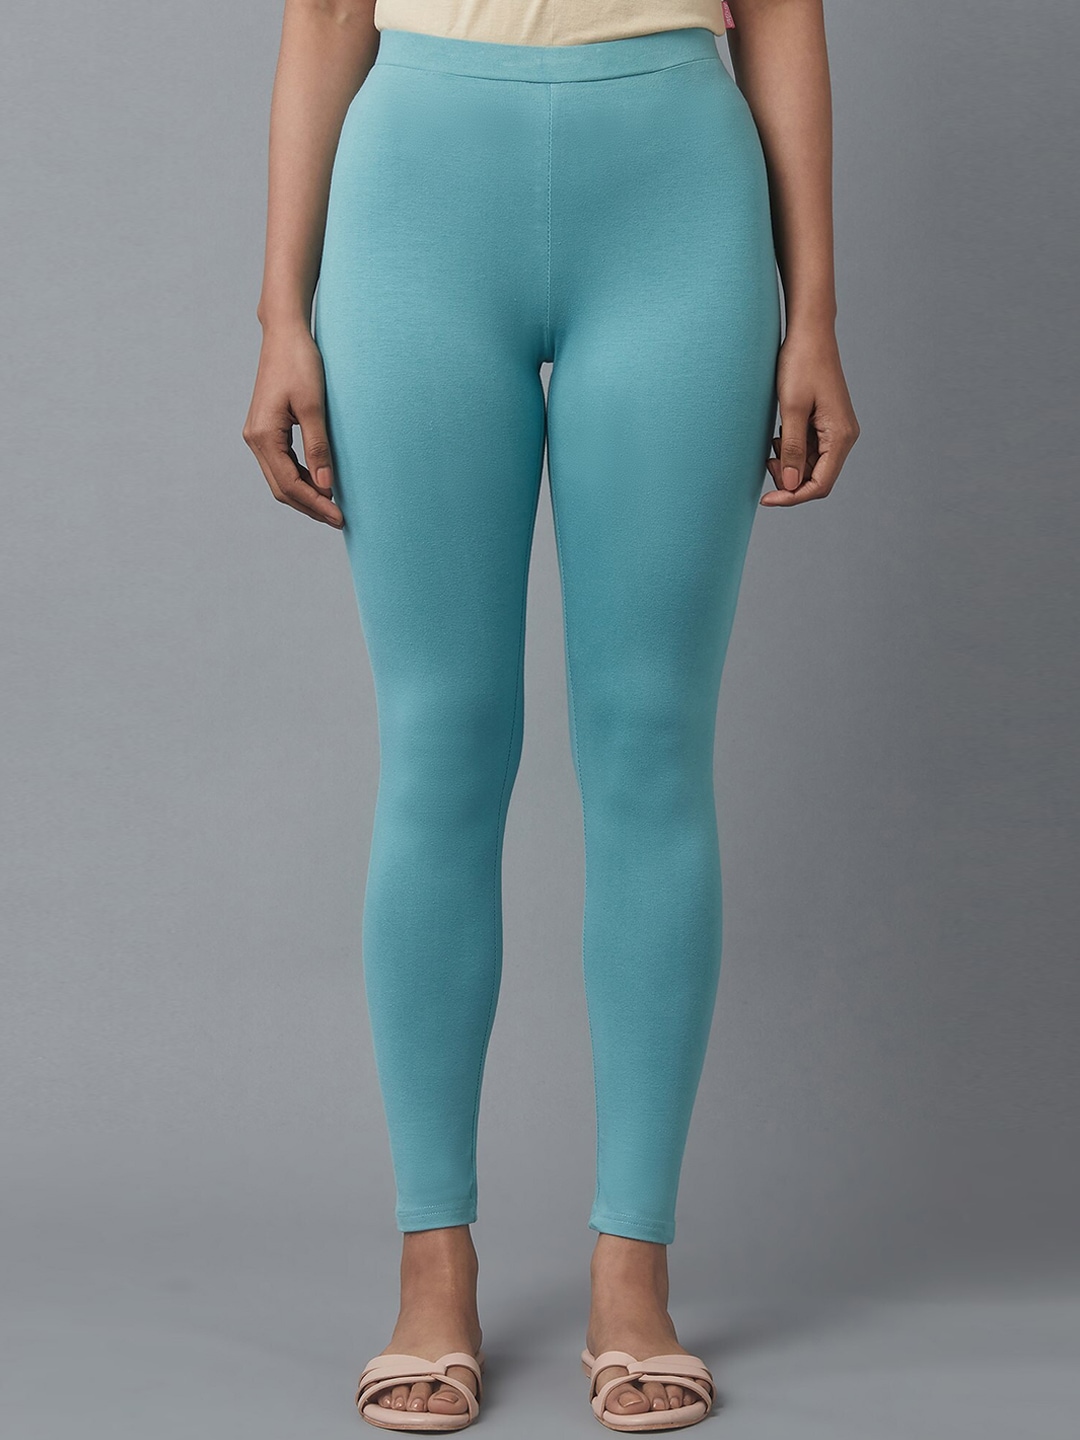 W Women Blue Solid Ankle-Length Leggings Price in India